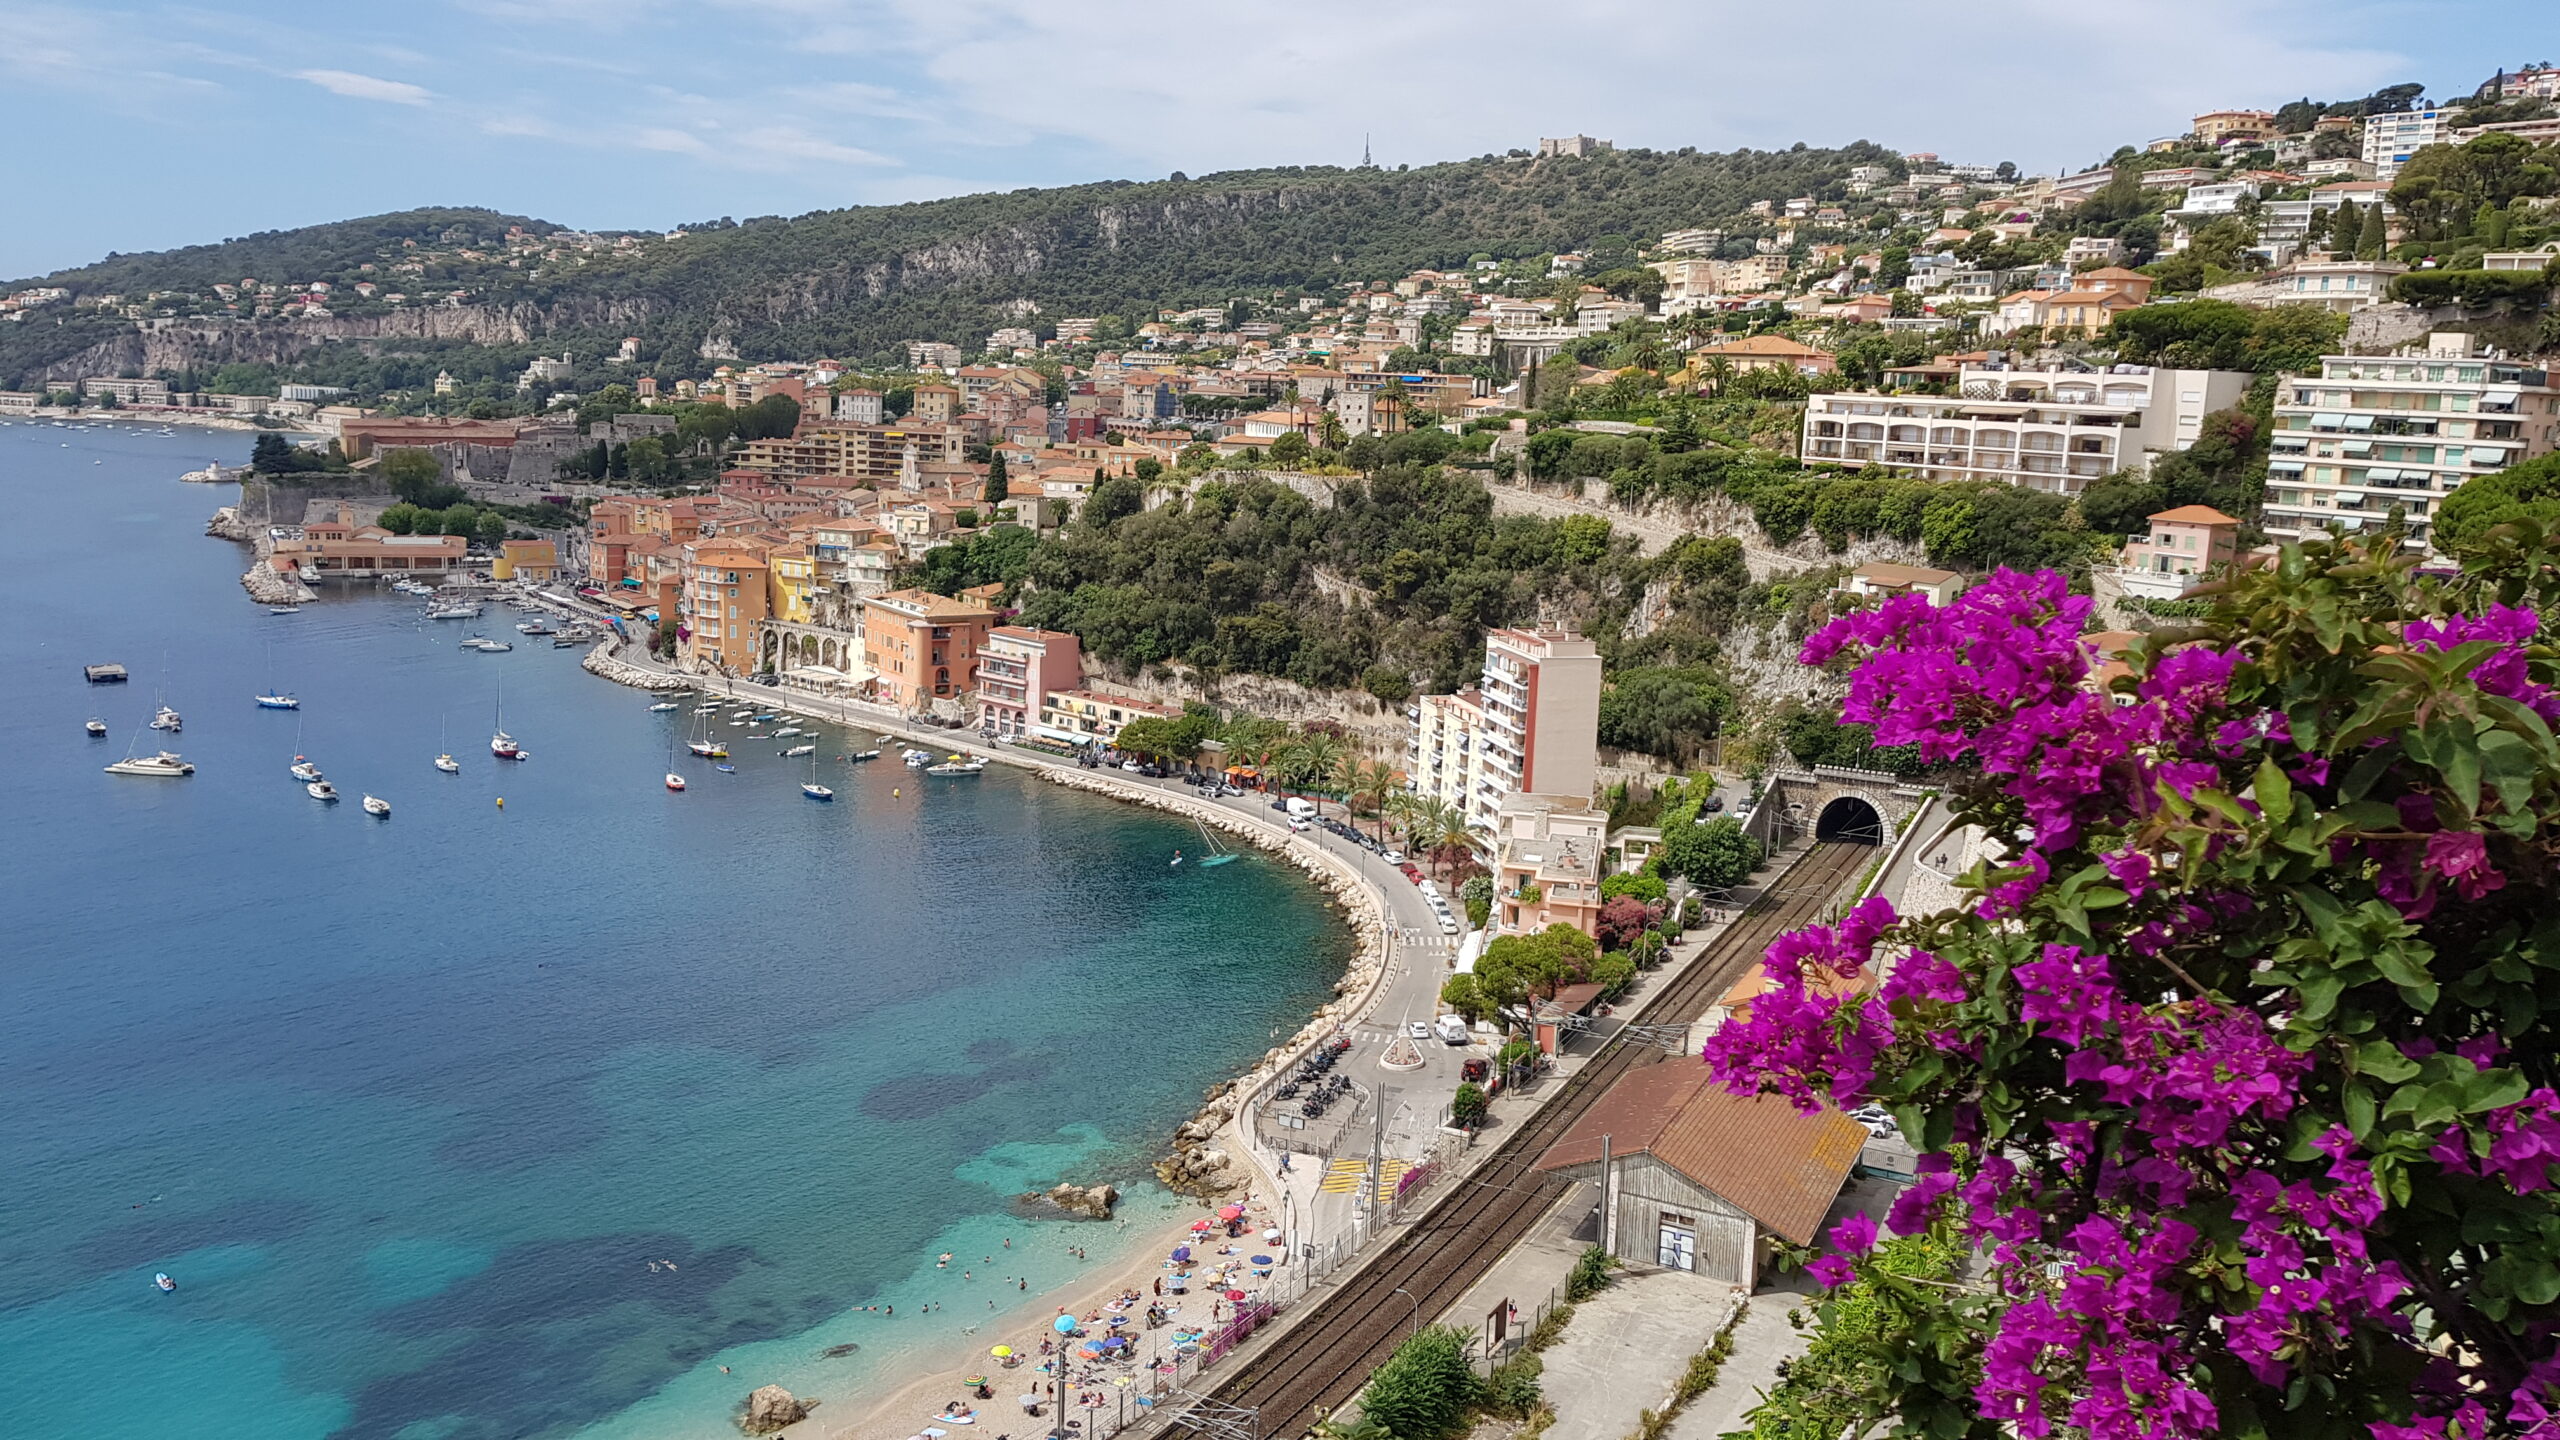 French Riviera / Côte d’Azur: Sea and Glamour